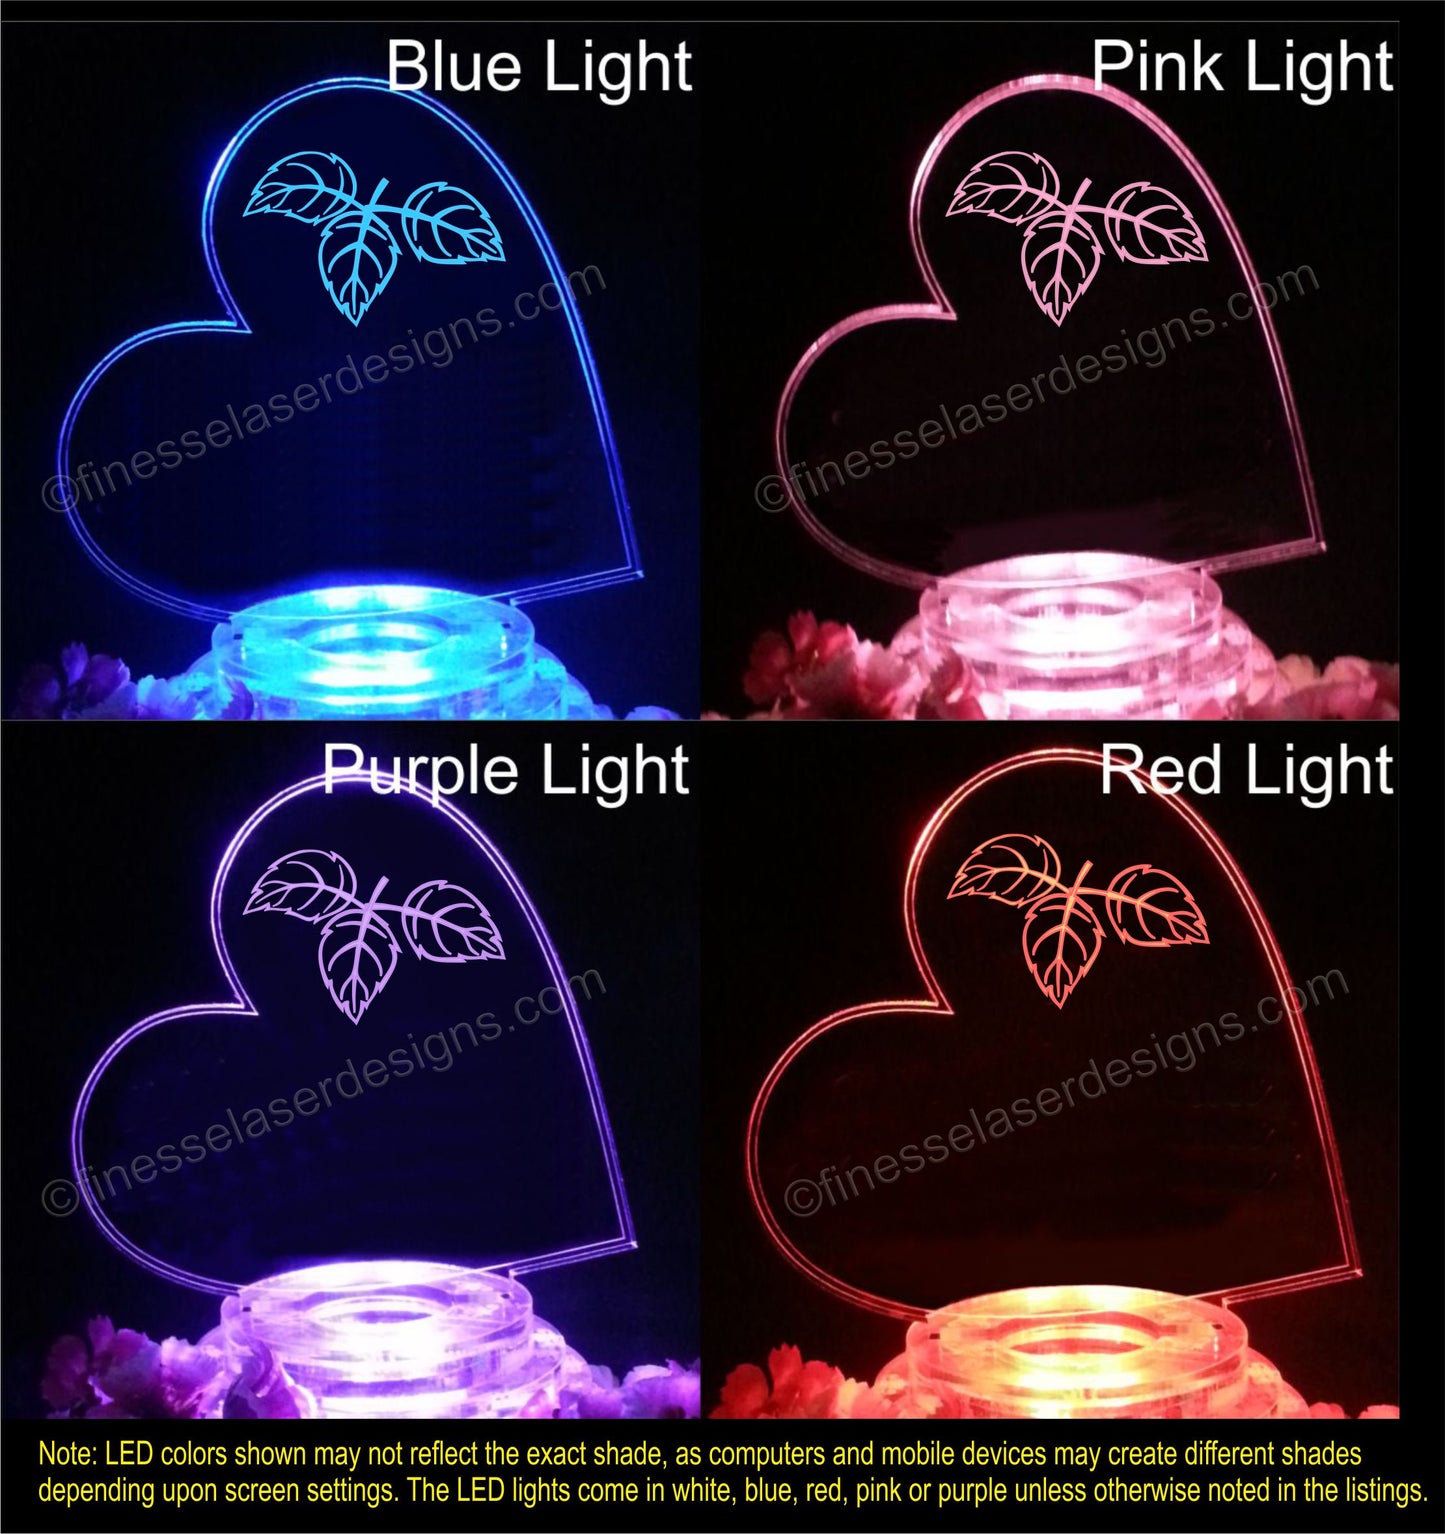 4 colored light views of an acrylic heart shaped cake topper designed with fall leaves, shown in blue, pink, purple and red lights